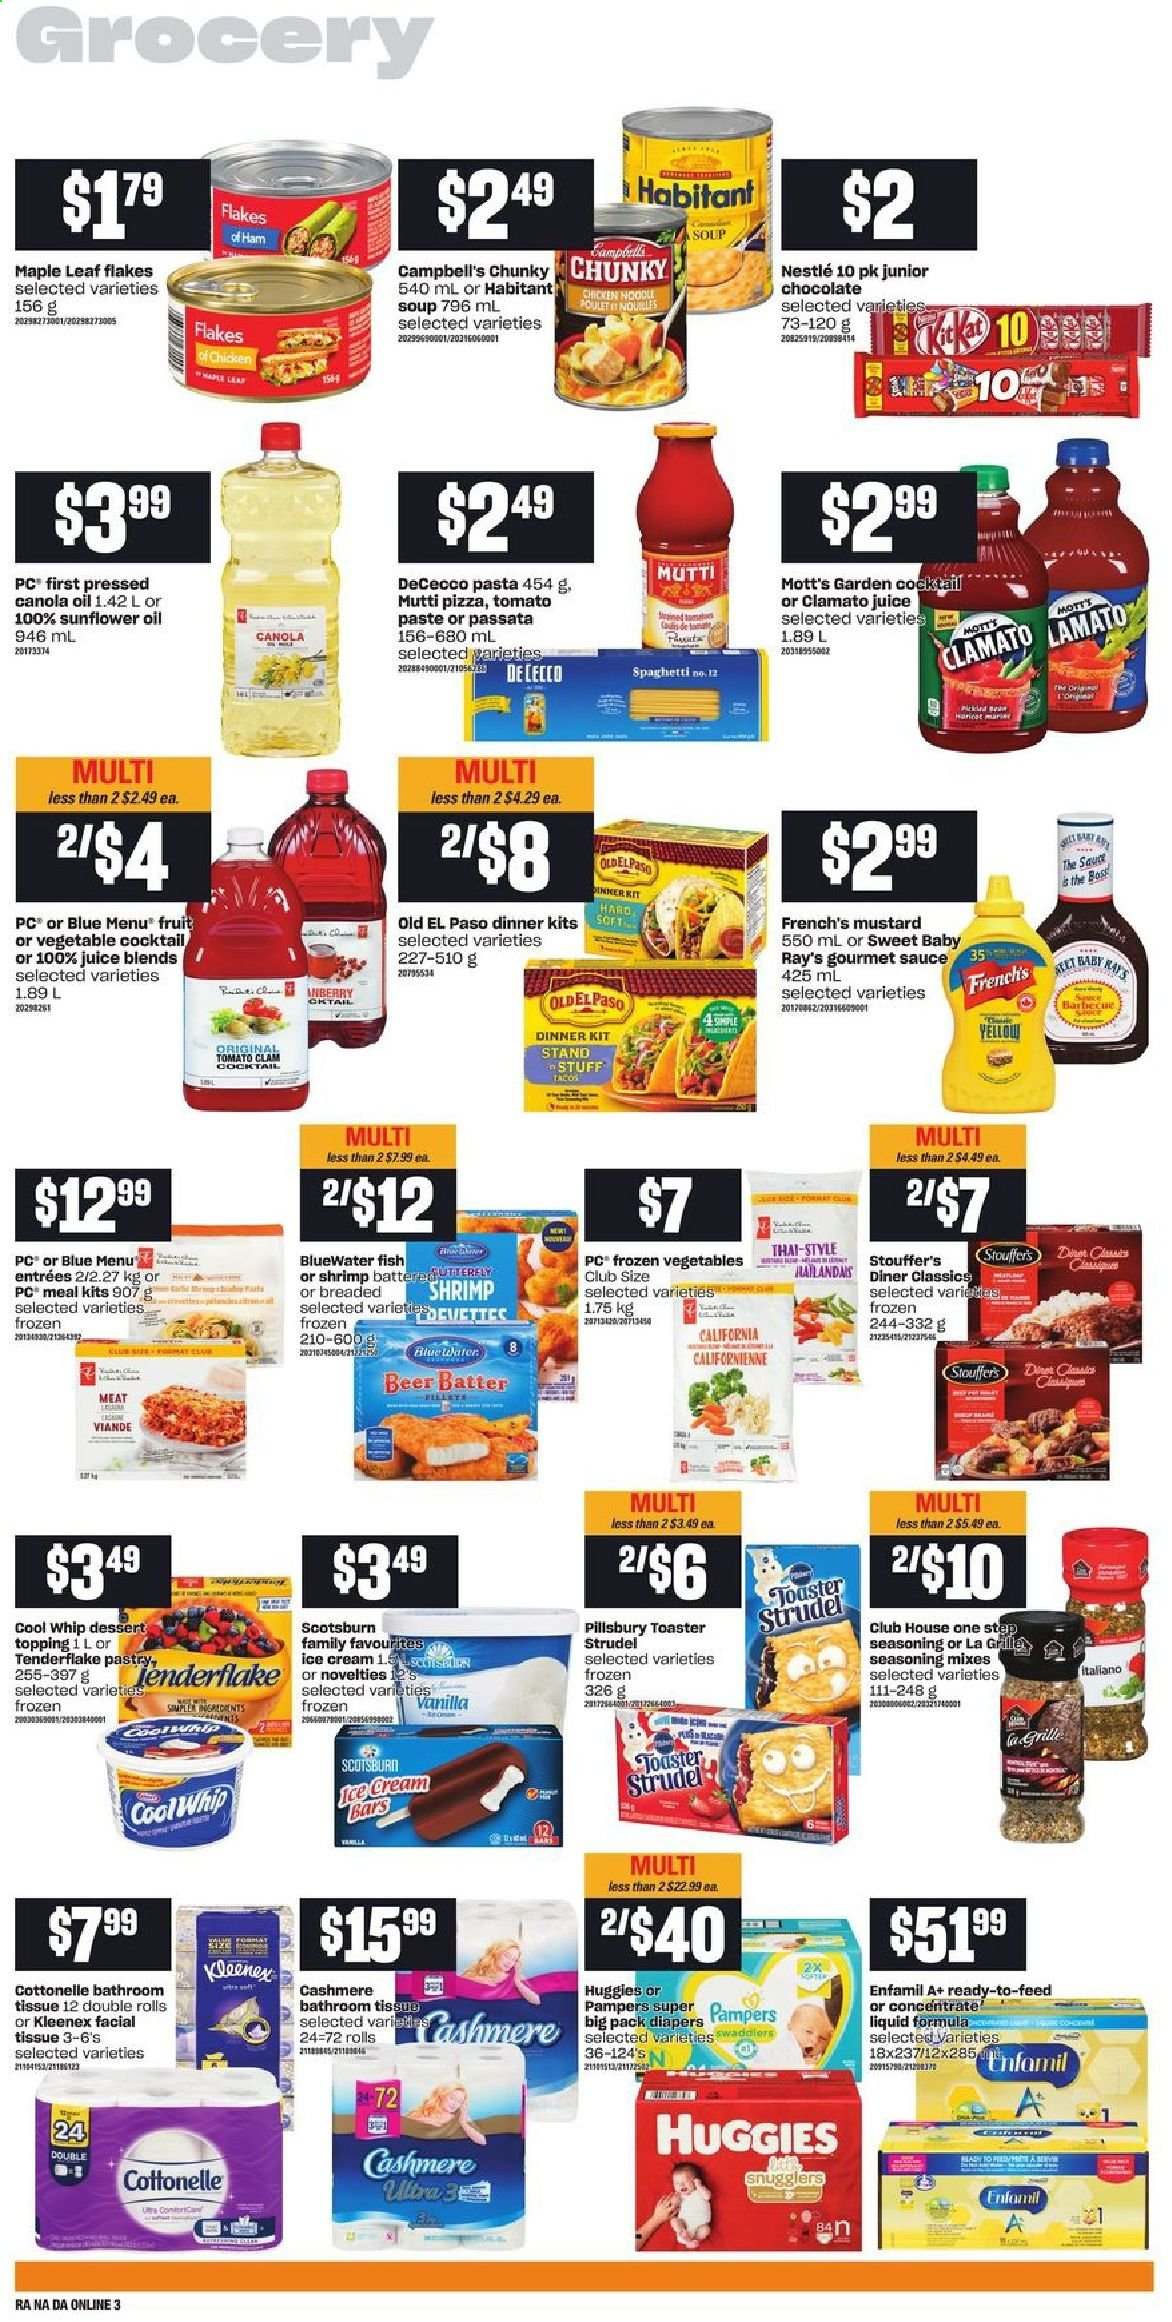 thumbnail - Atlantic Superstore Flyer - May 20, 2021 - May 26, 2021 - Sales products - strudel, Old El Paso, Mott's, clams, fish, shrimps, Campbell's, spaghetti, pizza, soup, pasta, sauce, dinner kit, ham, Cool Whip, ice cream, ice cream bars, frozen vegetables, Stouffer's, topping, tomato paste, spice, mustard, canola oil, sunflower oil, oil, juice, Clamato, beer, Enfamil, nappies, bath tissue, Cottonelle, Kleenex, Nestlé, Huggies, Pampers. Page 7.